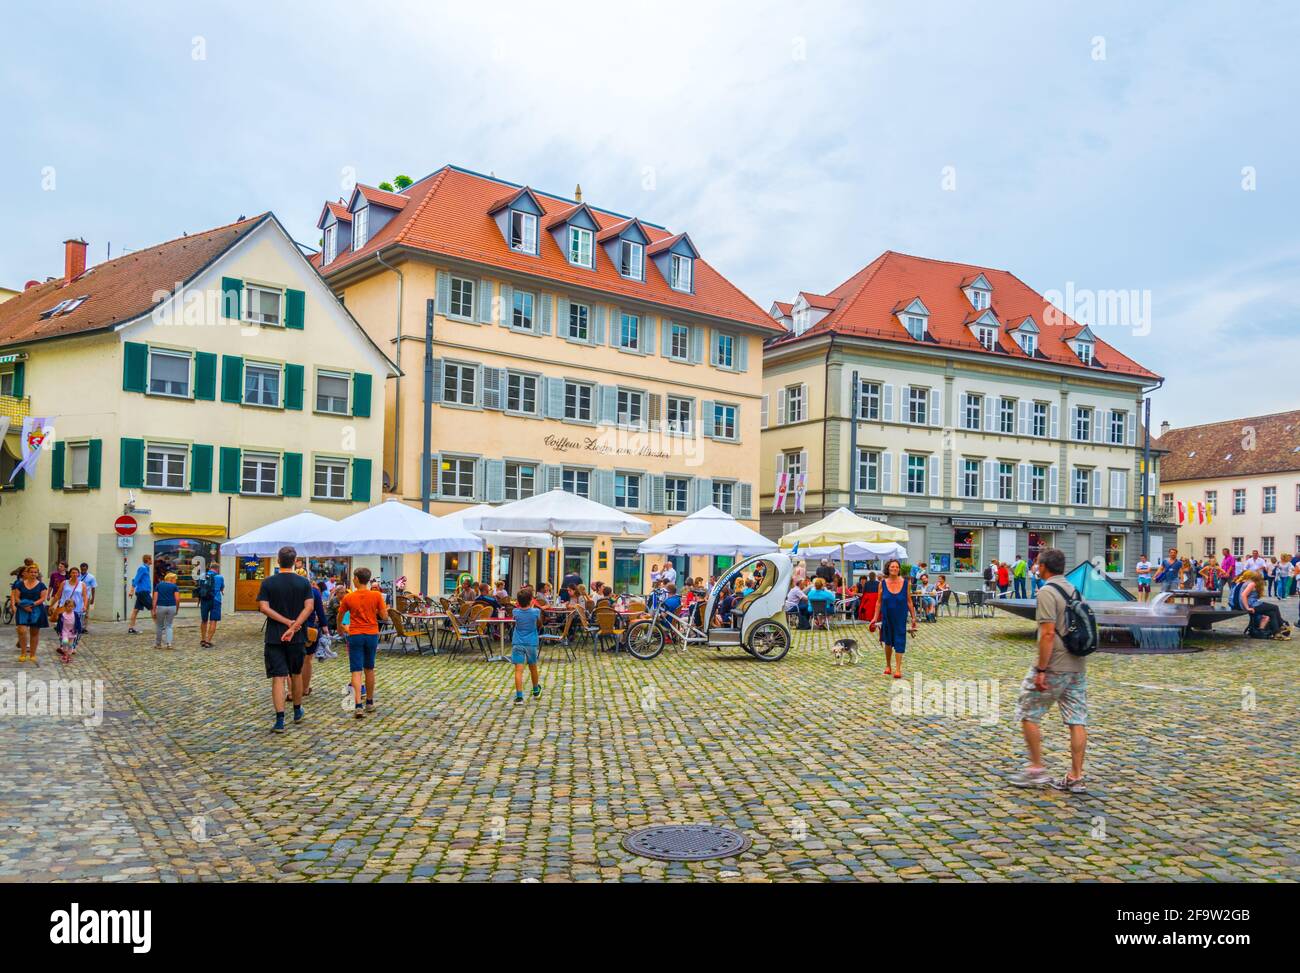 KONSTANZ, GERMANY, JULY 23, 2016: View of a square in front of the cathedral in Konstanz in Germany. Stock Photo